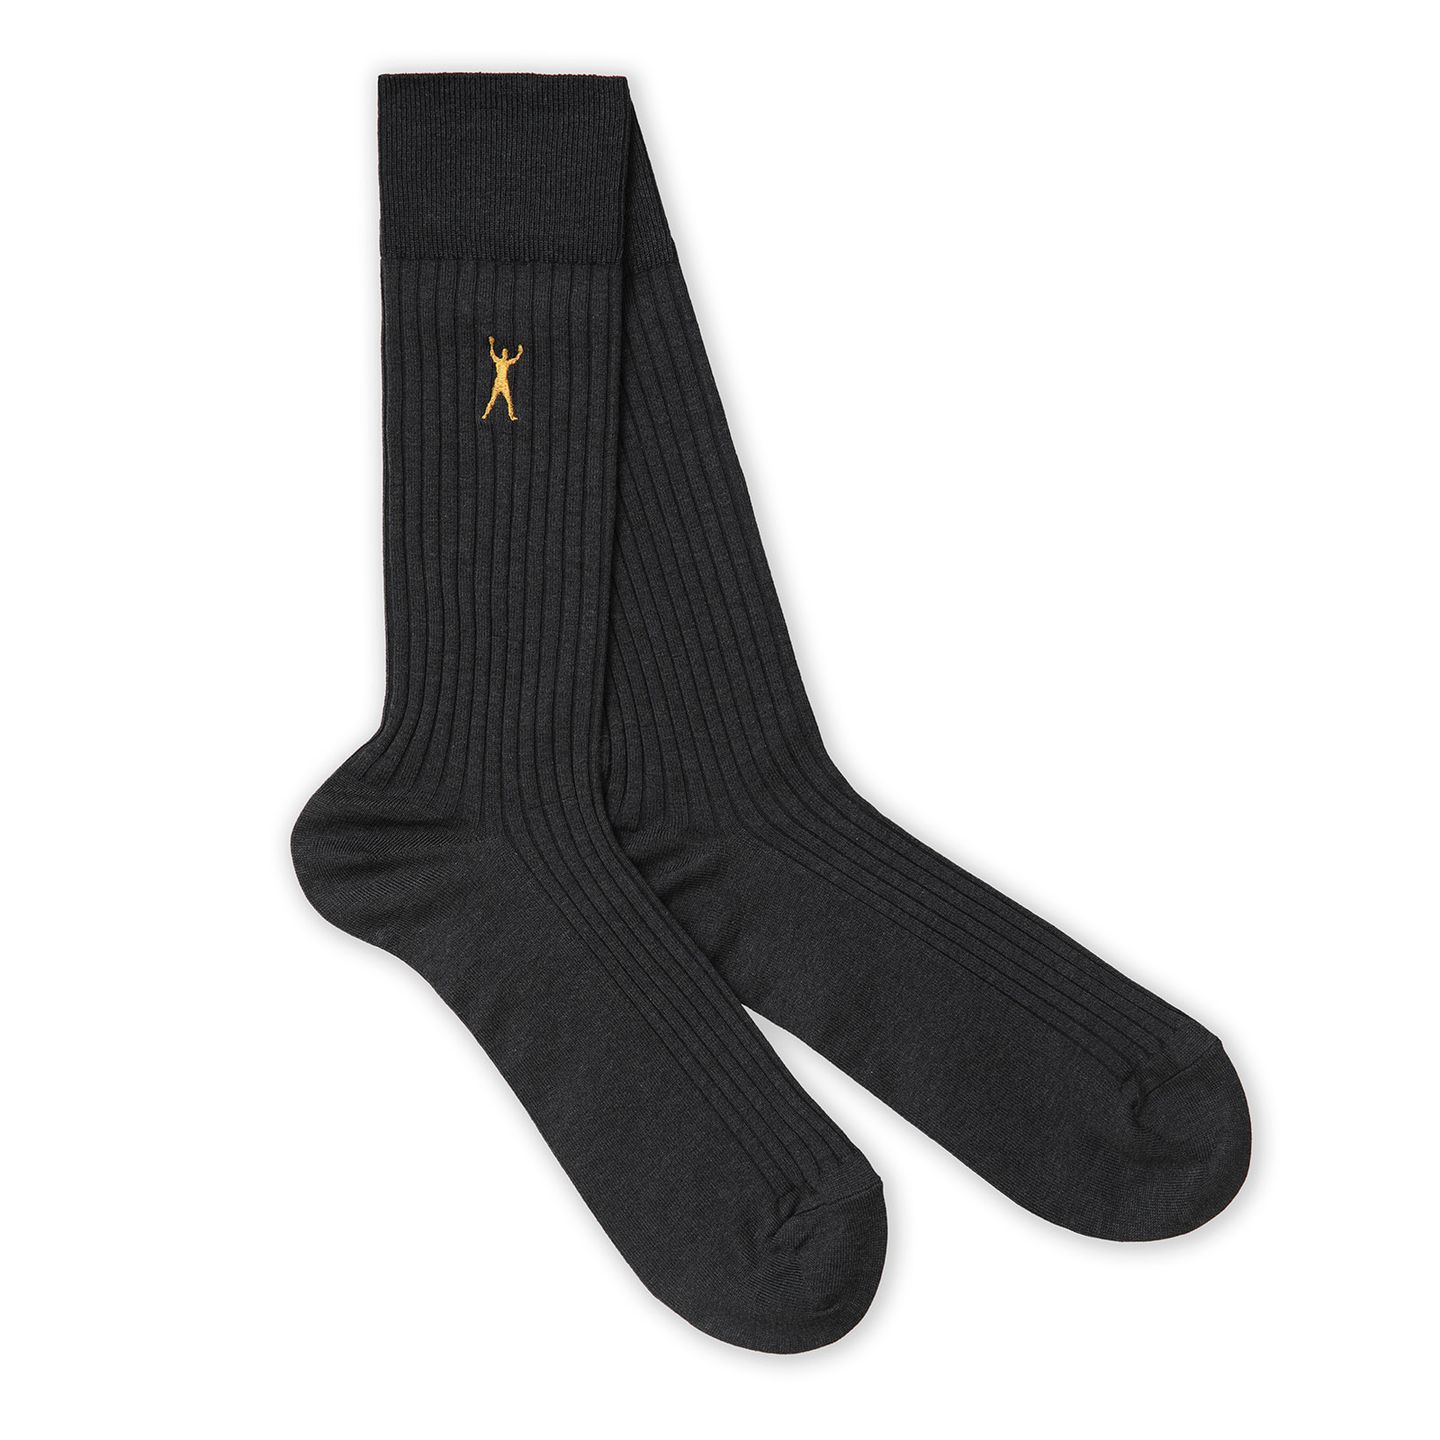 Charcoal pair of socks, with a gold logo from the Muhammad Ali Collection